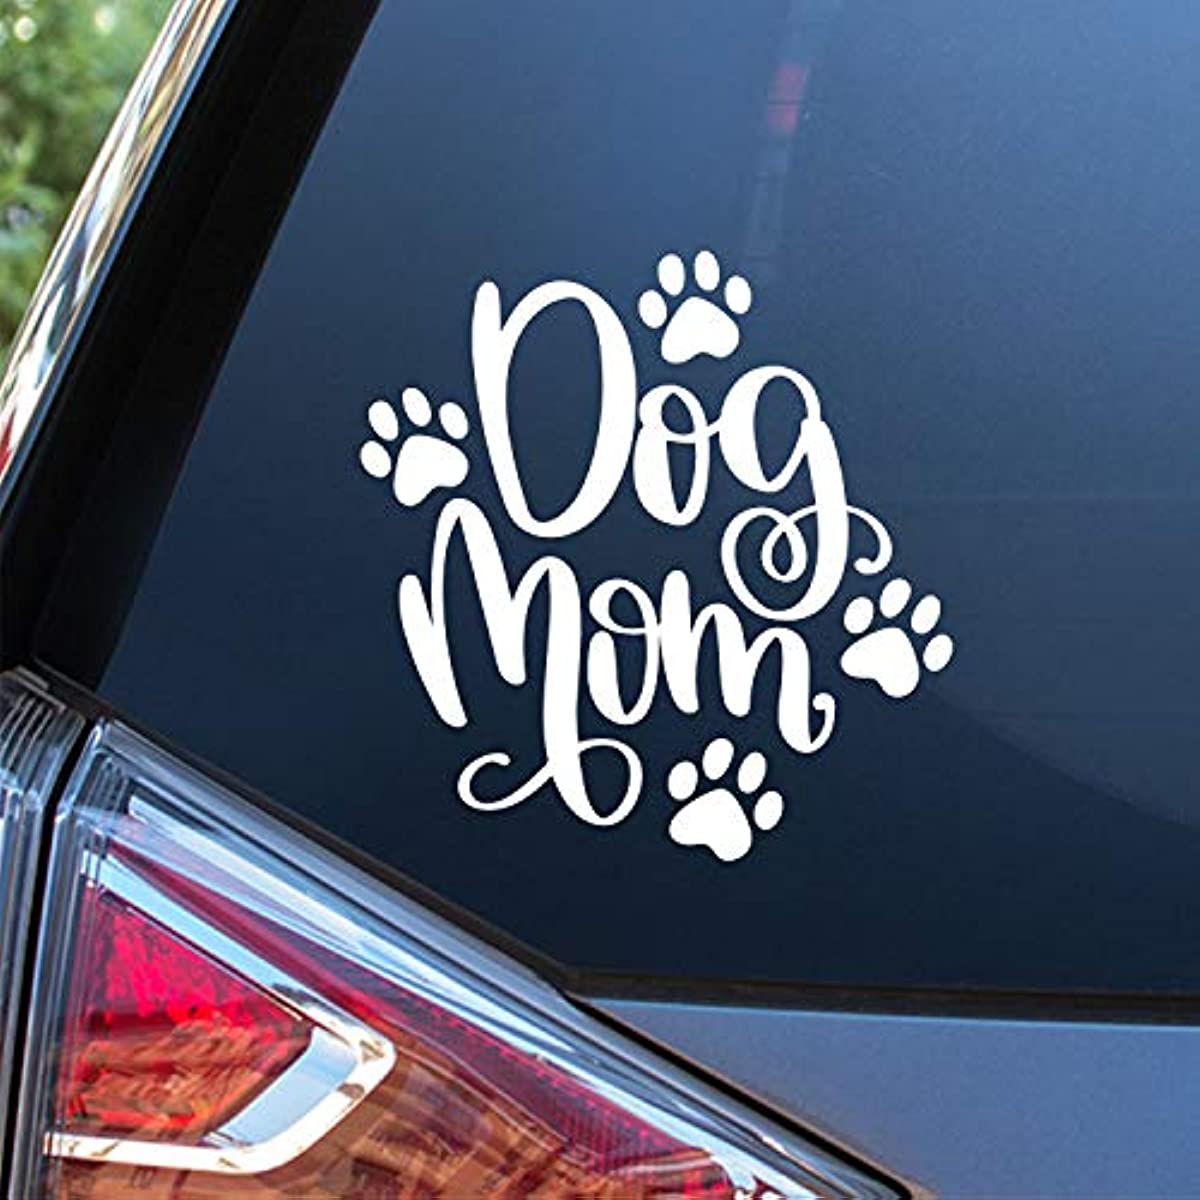 

Show Your Love For Your Dog - Adorable Dog Mom Decal Vinyl Sticker For Cars, Trucks, Suvs, And More!